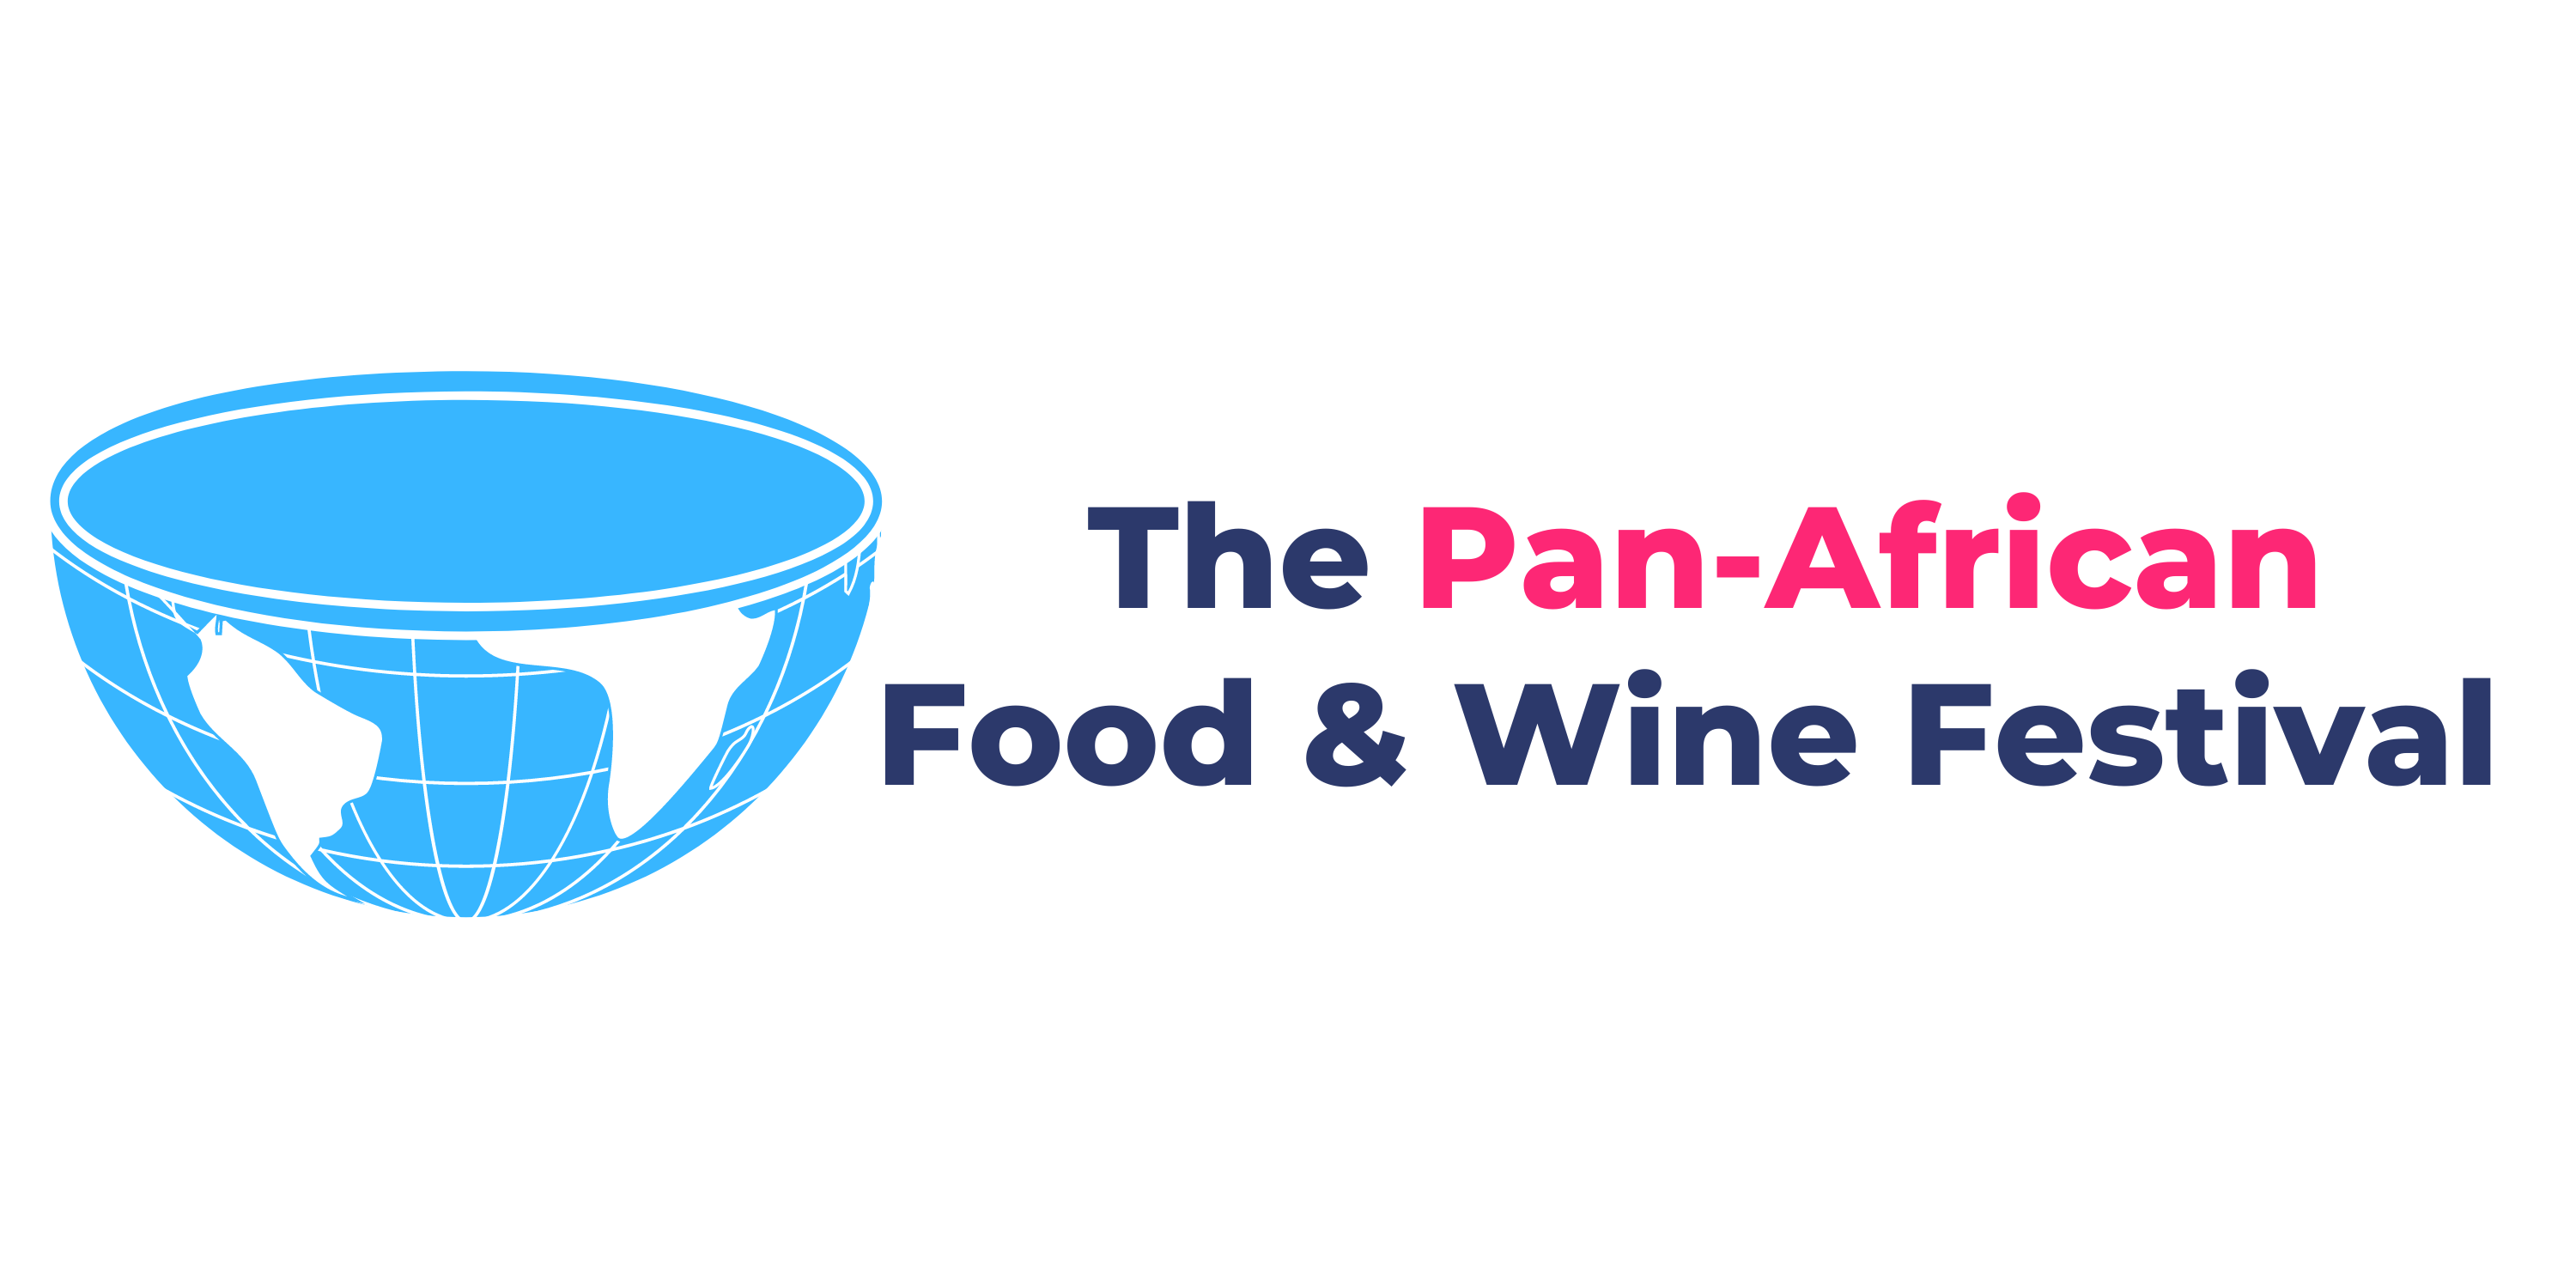 The Pan-African Food Festival